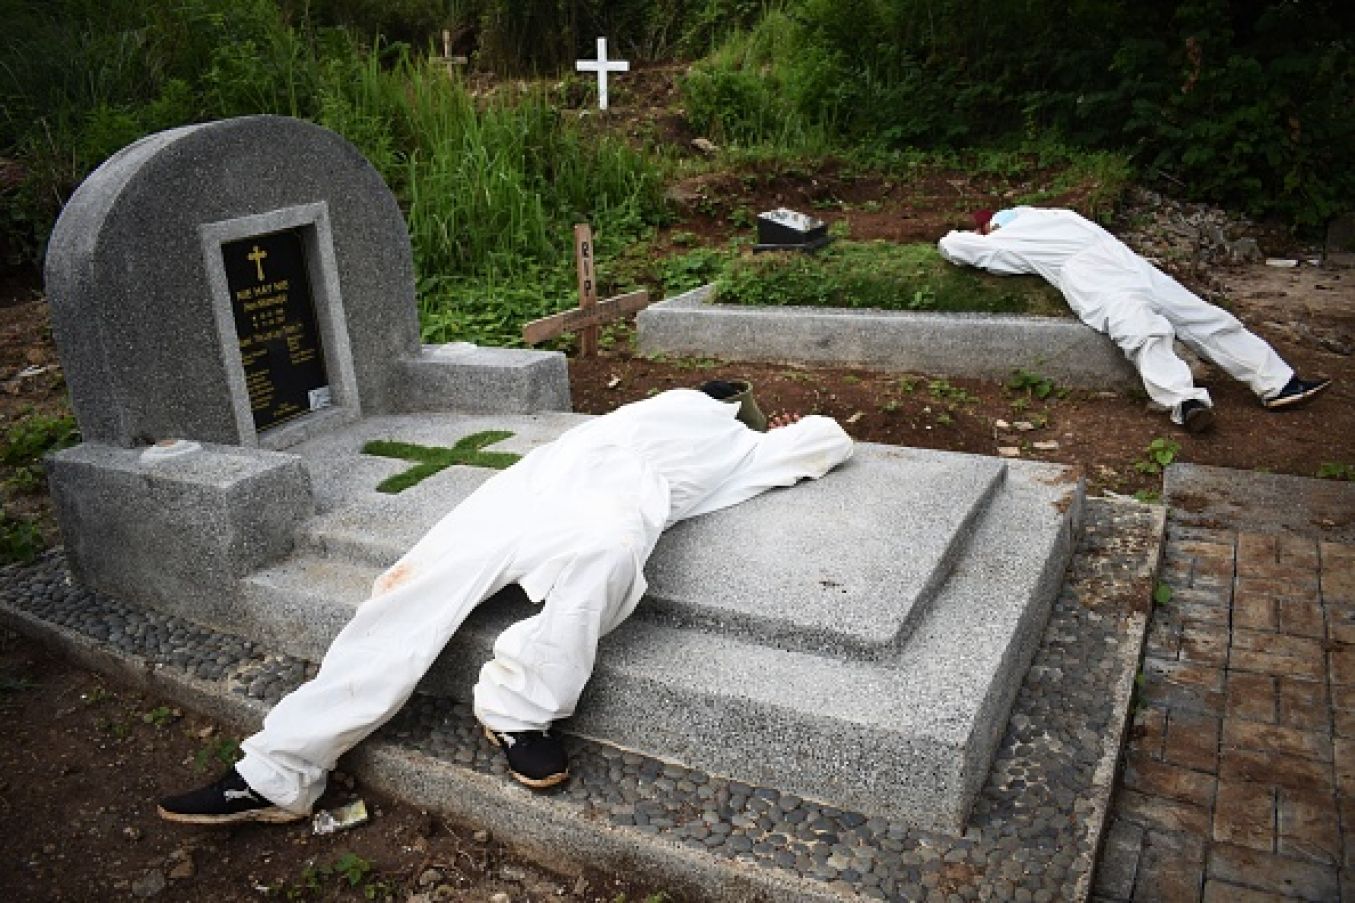 Exhausted Grave Diggers Rest In Between Funerals At A Cemetery Designated For Covid-19 Victims In Indonesia. Photo: Timur Matahari/Afp Via Getty Images